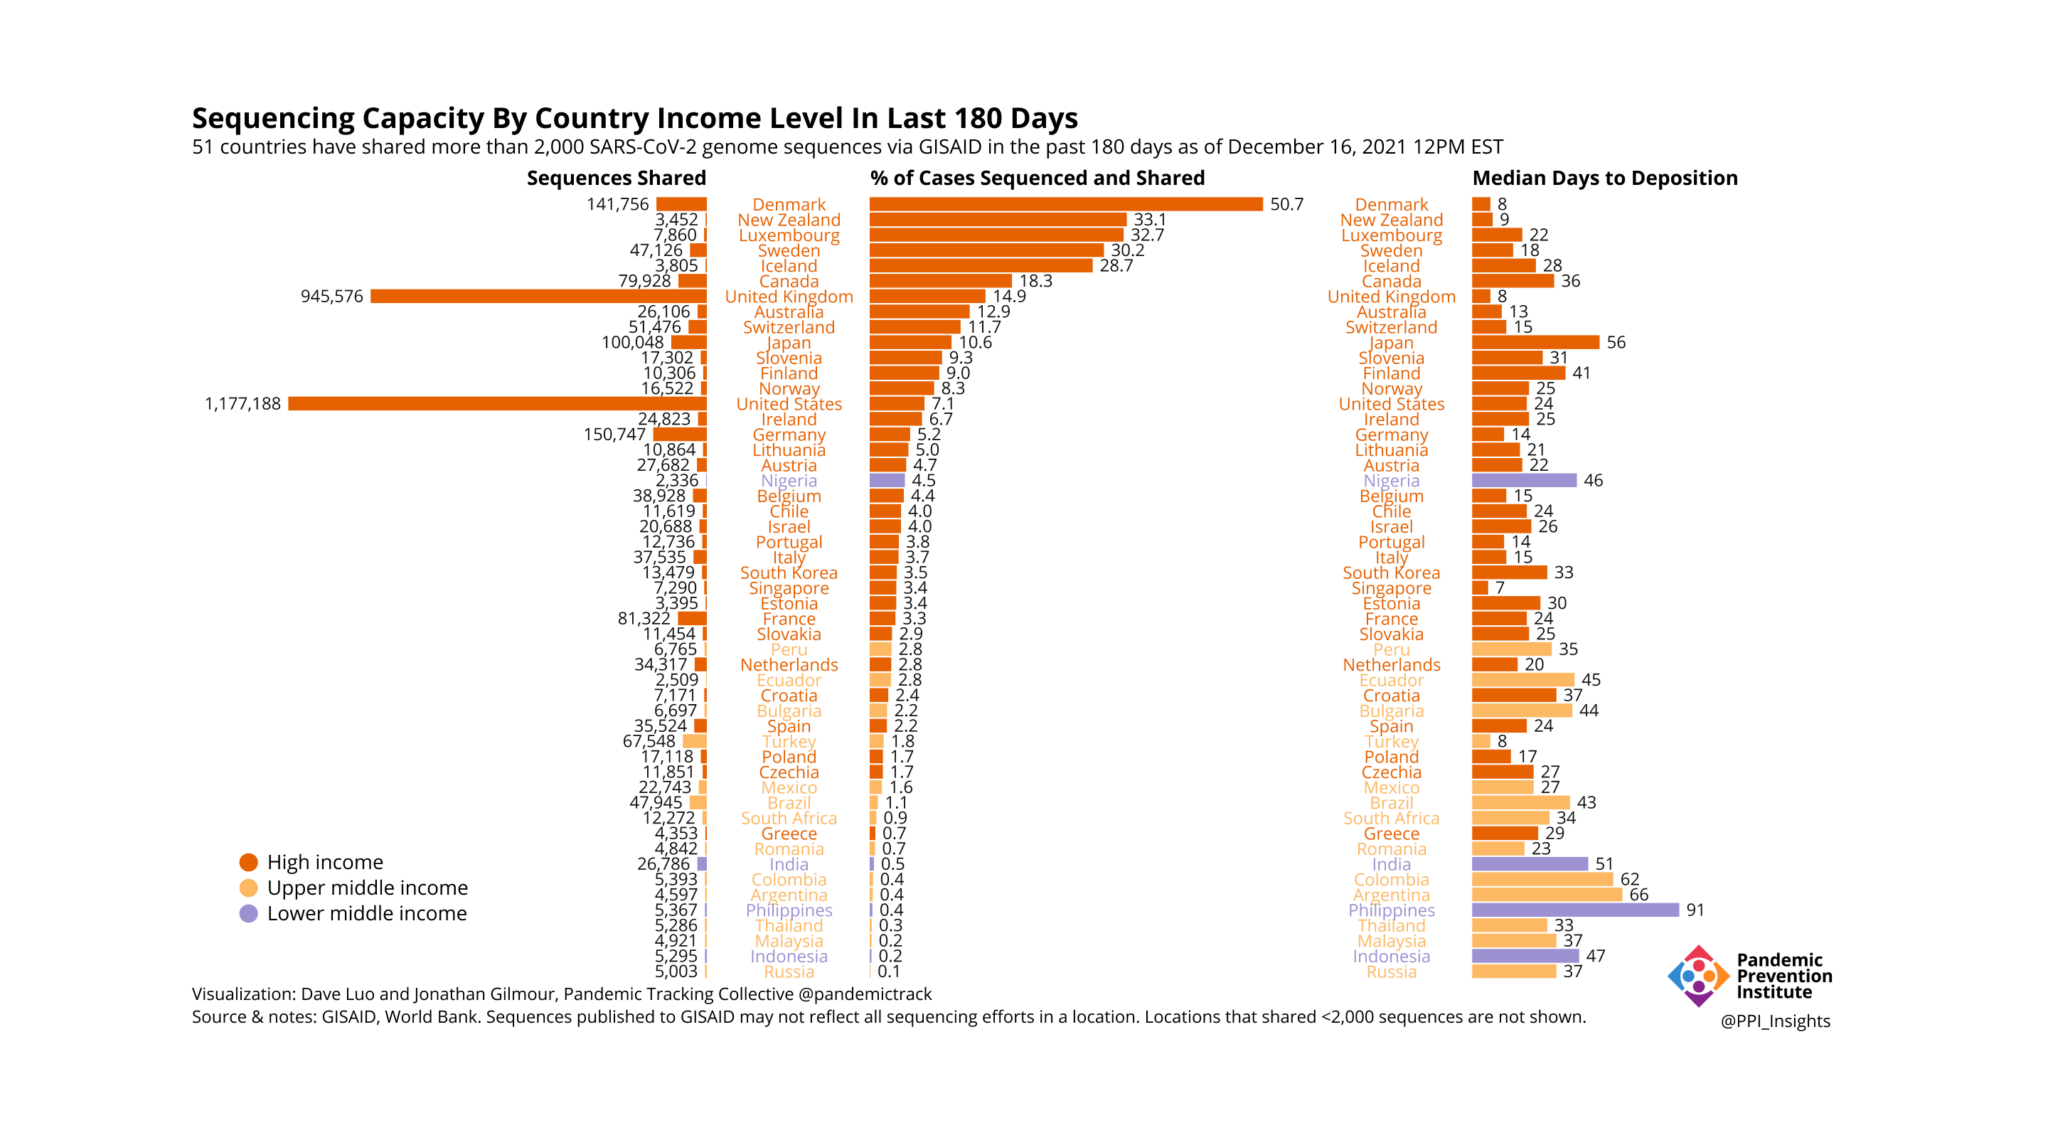 3 bar charts showing sequences shared, % of cases sequenced and shared, and median days to deposition of data per country, colored by country income level.